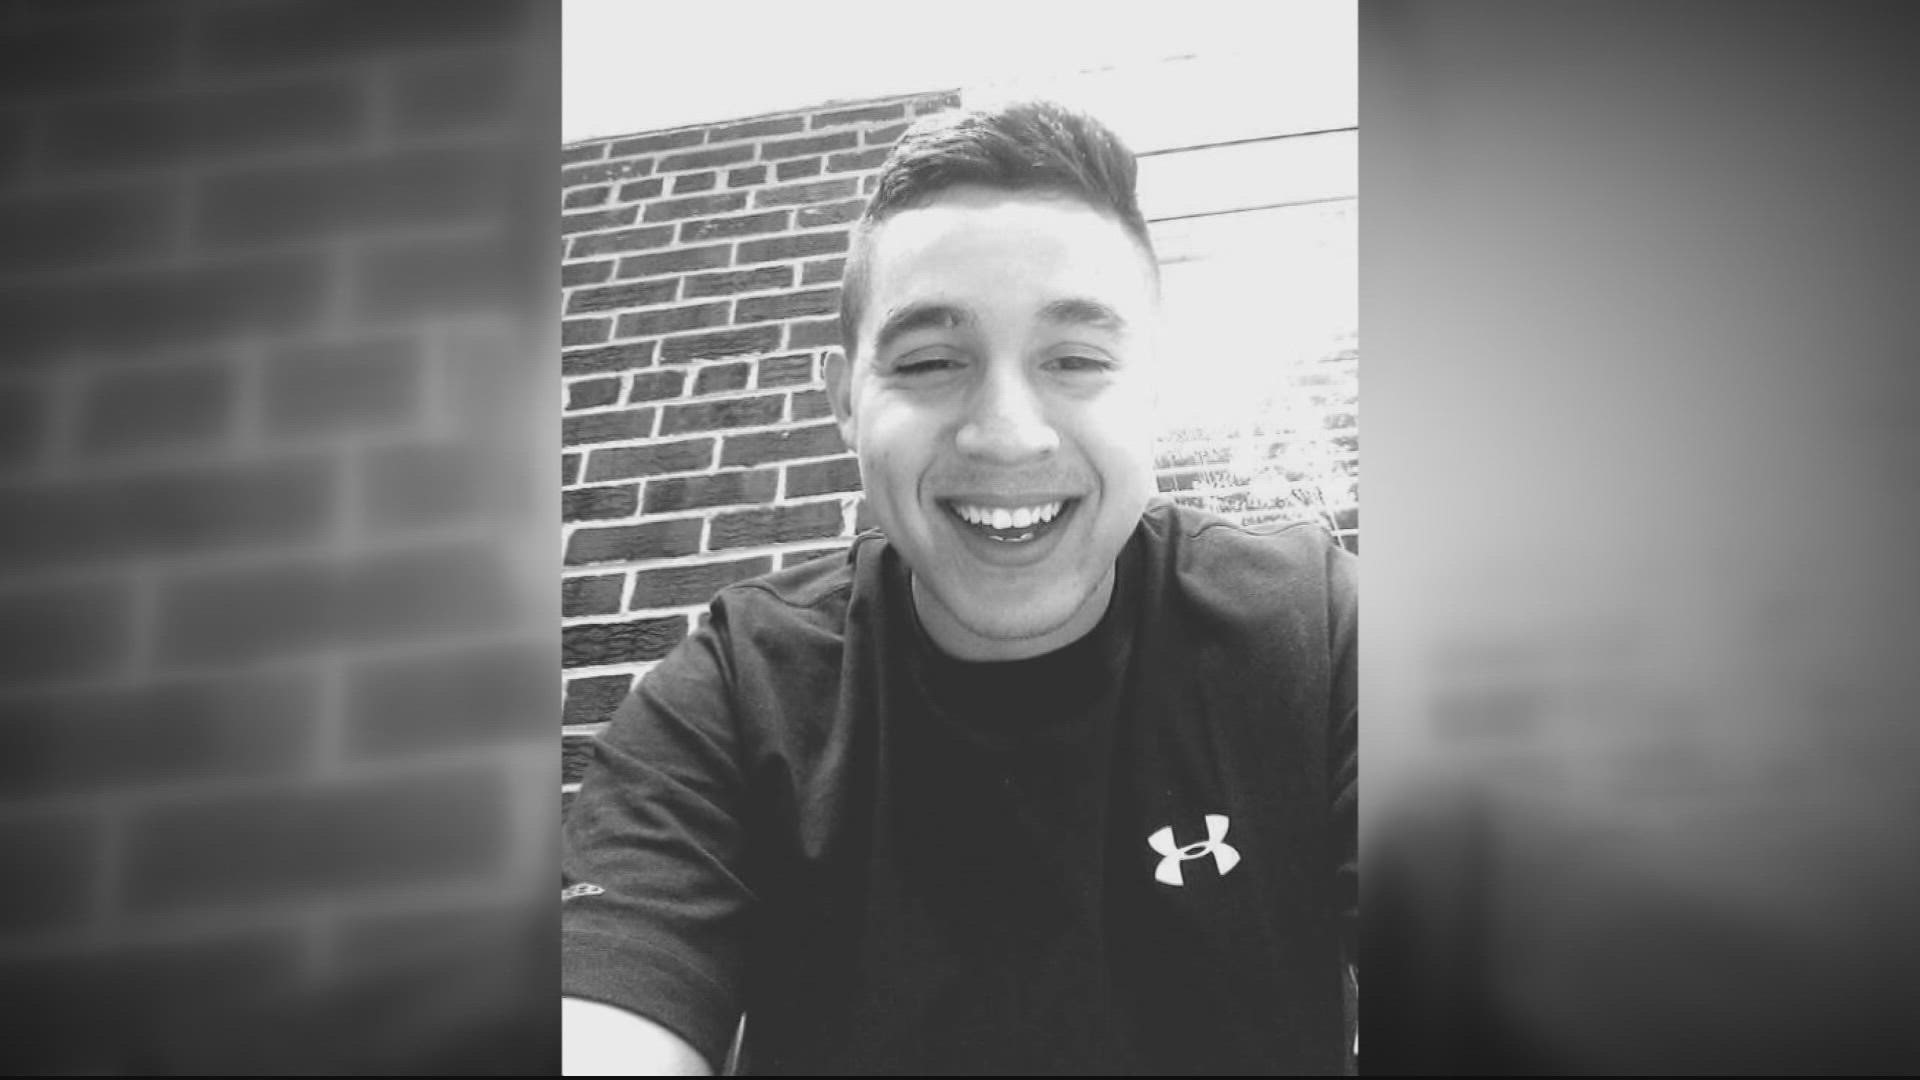 School Master X Video - Community mourns death of special education teacher | wusa9.com